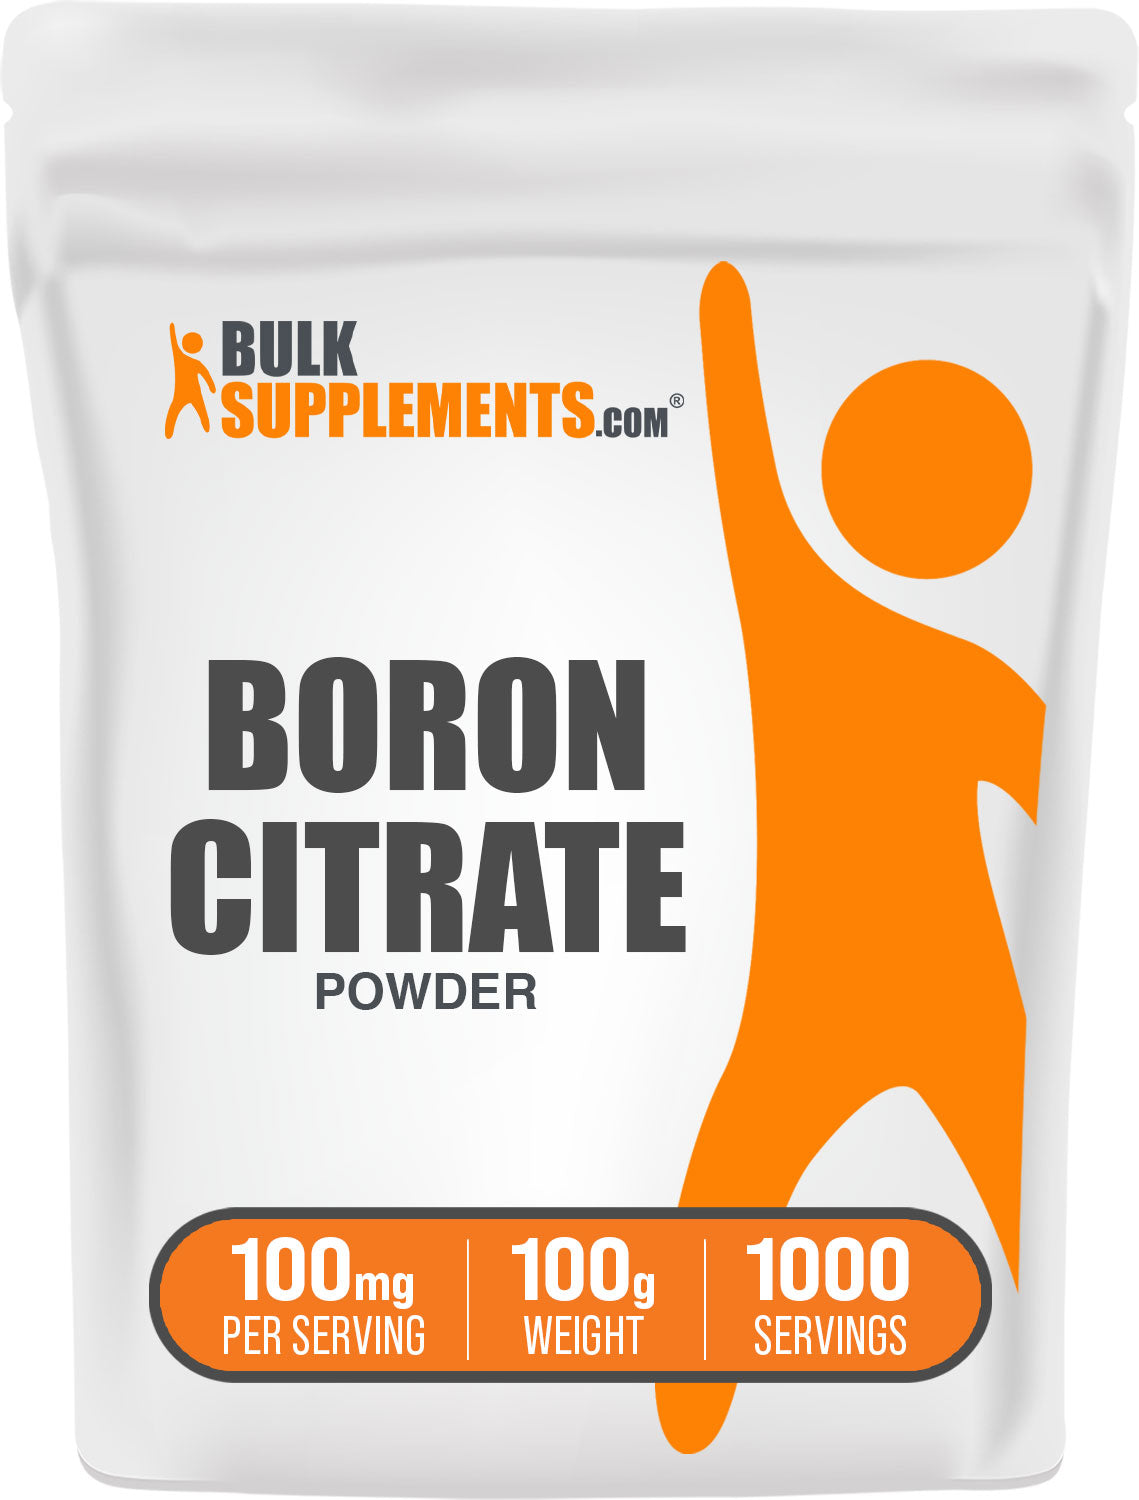 100g of boron citrate